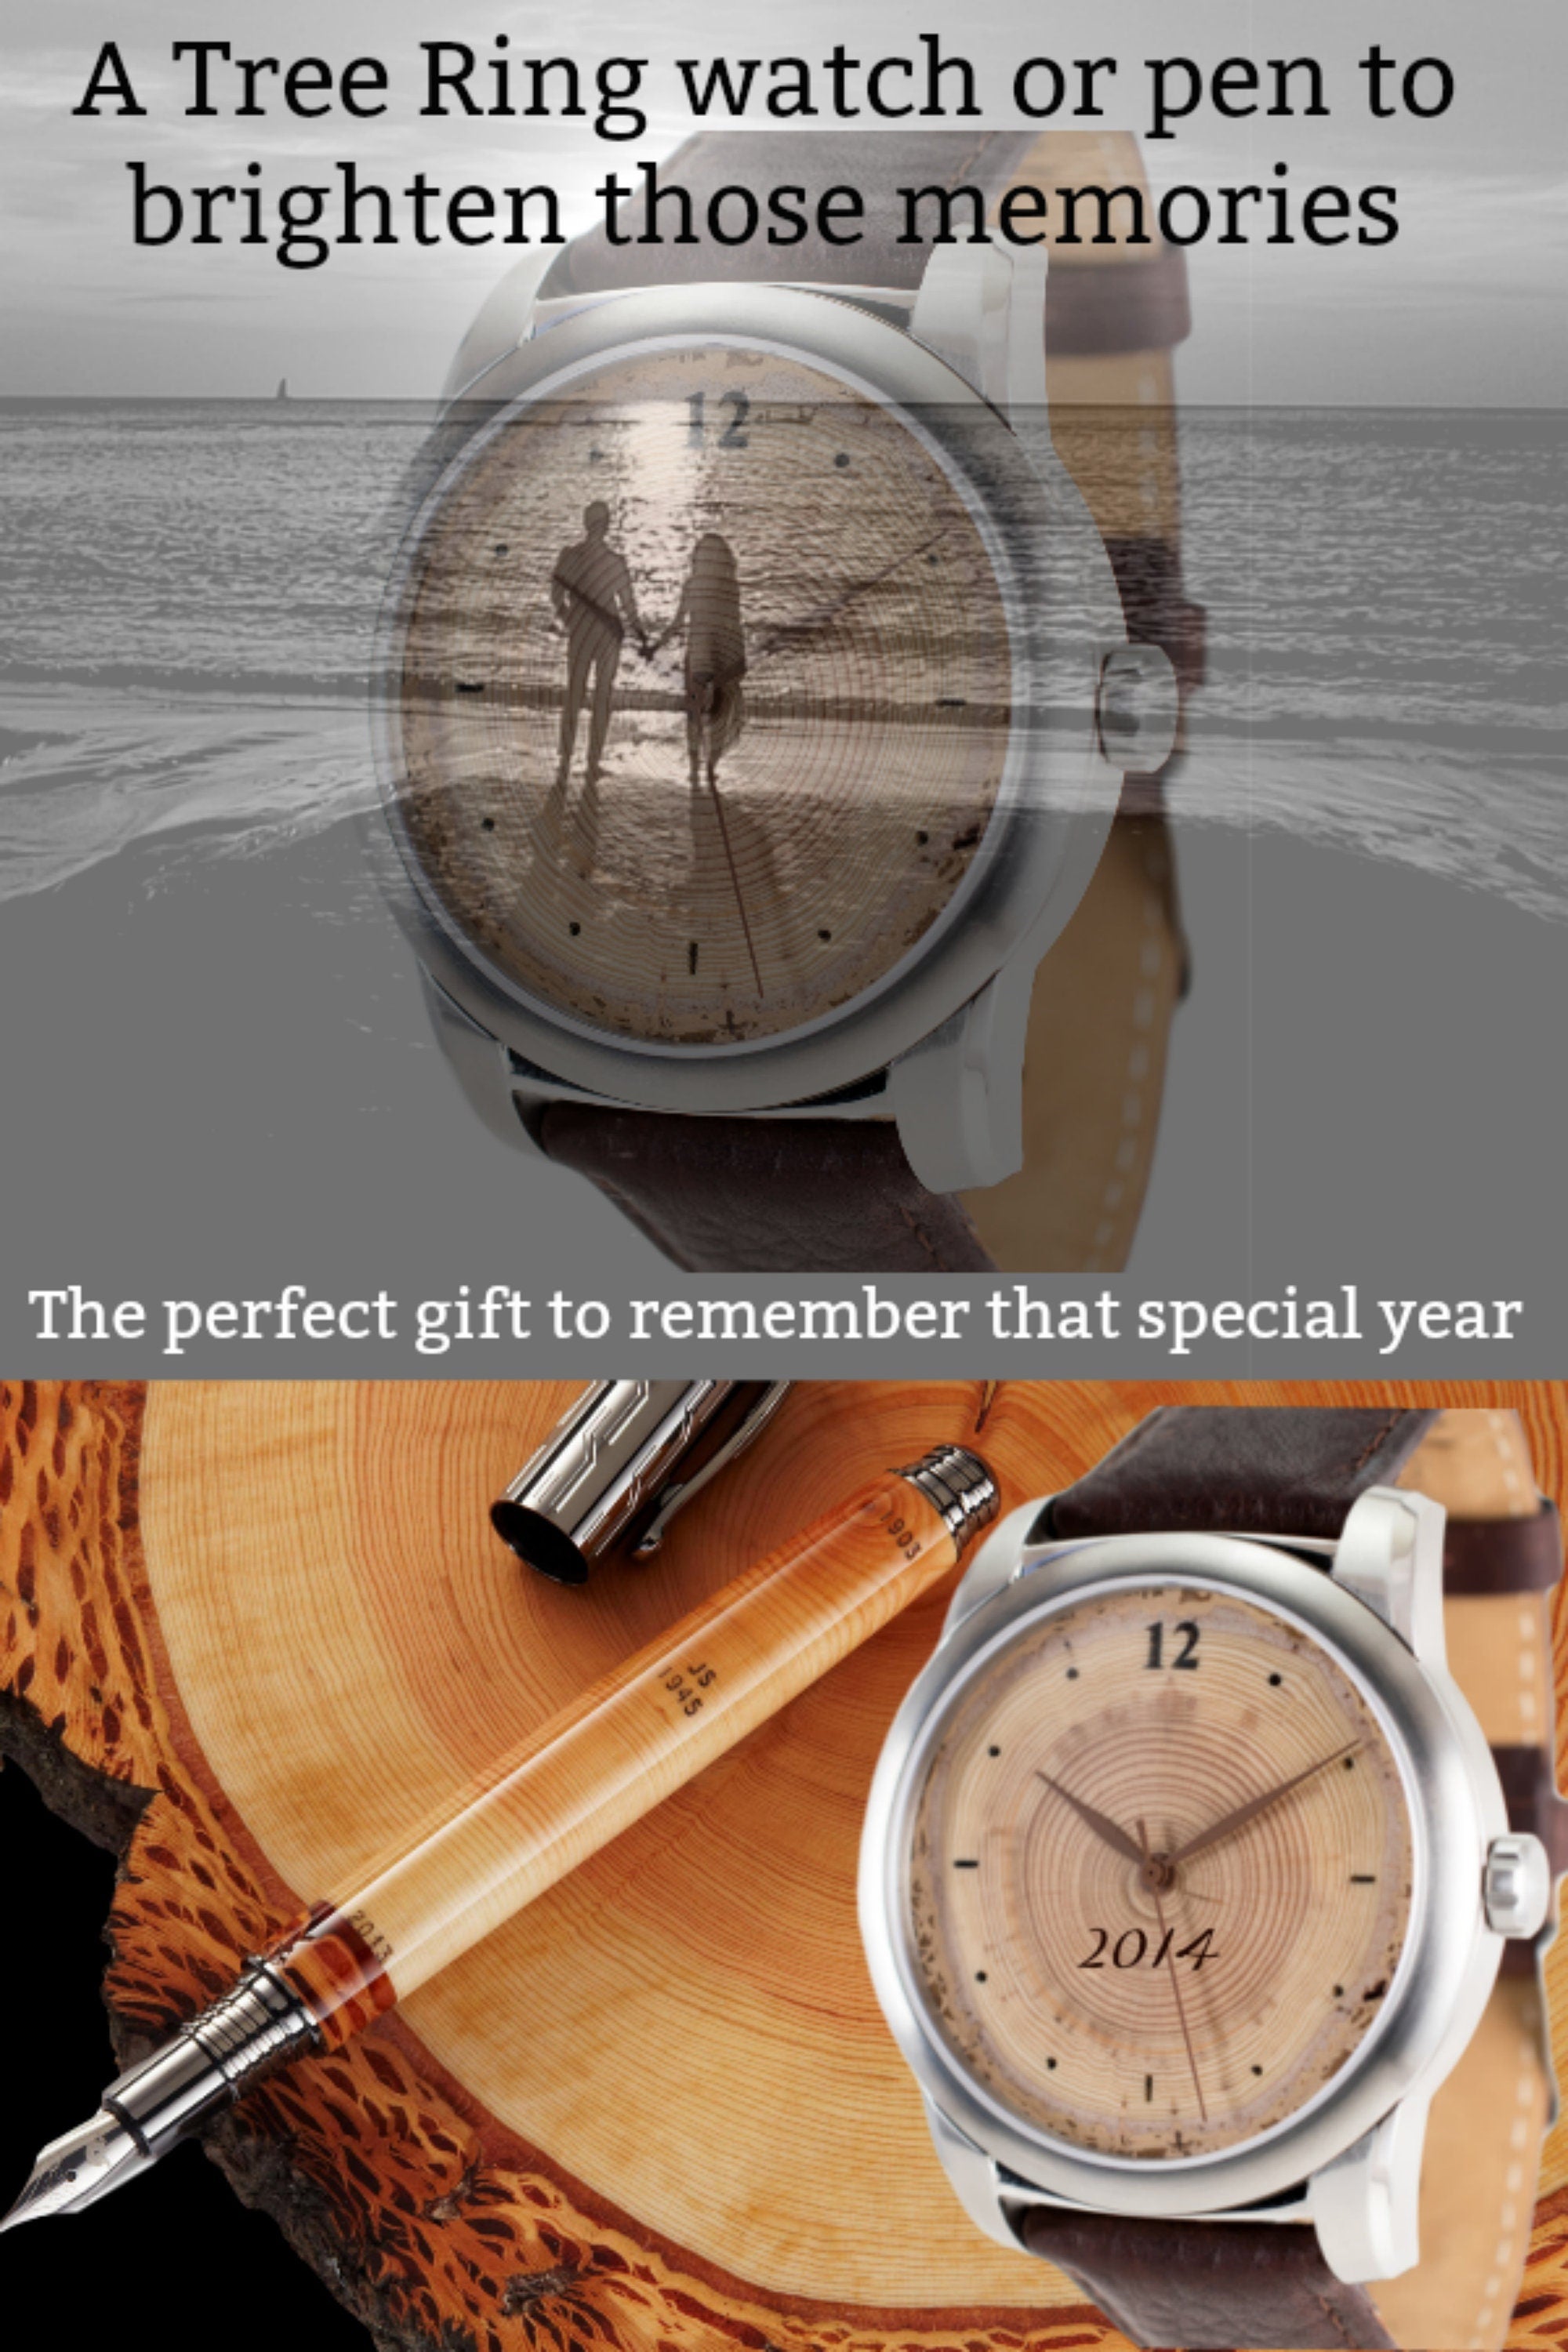 Watch Made of Tree Rings, 25th Wedding Anniversary Gift, 25th Anniversary Gift for Parents, silver Anniversary Gift, 25th birthday gift